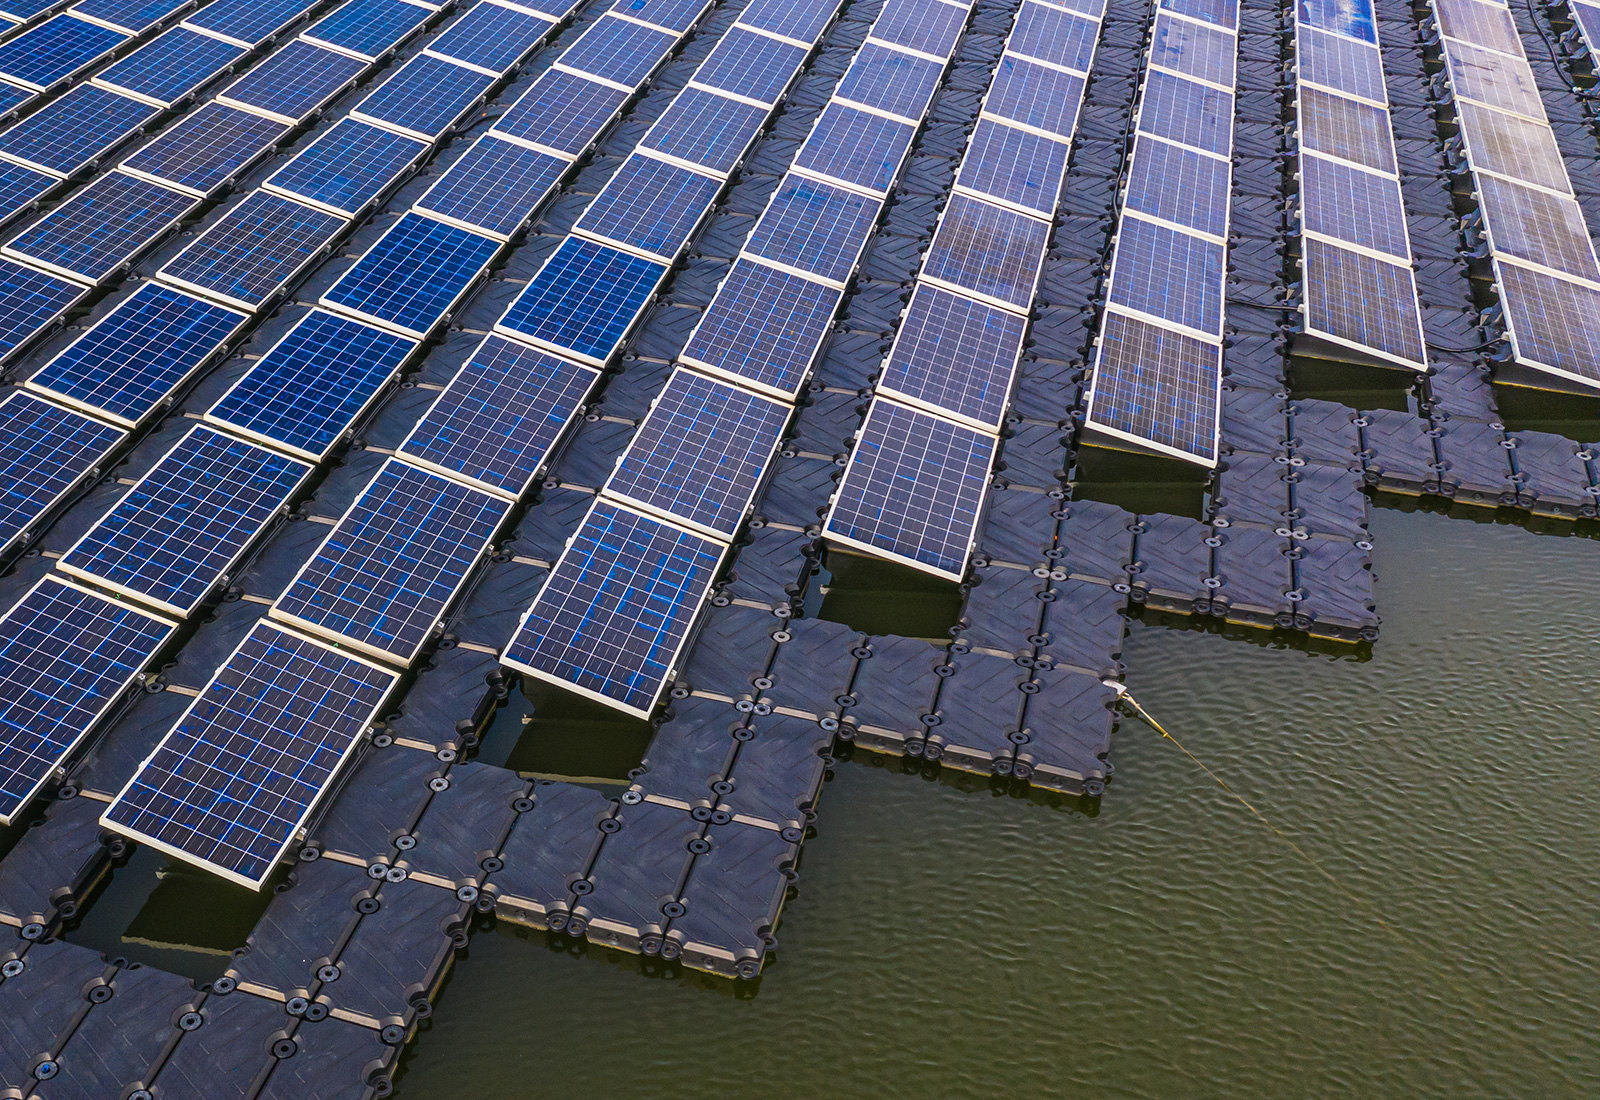 FPL is Floating Solar Panels on Miami Lakes - Key Biscayne Citizen